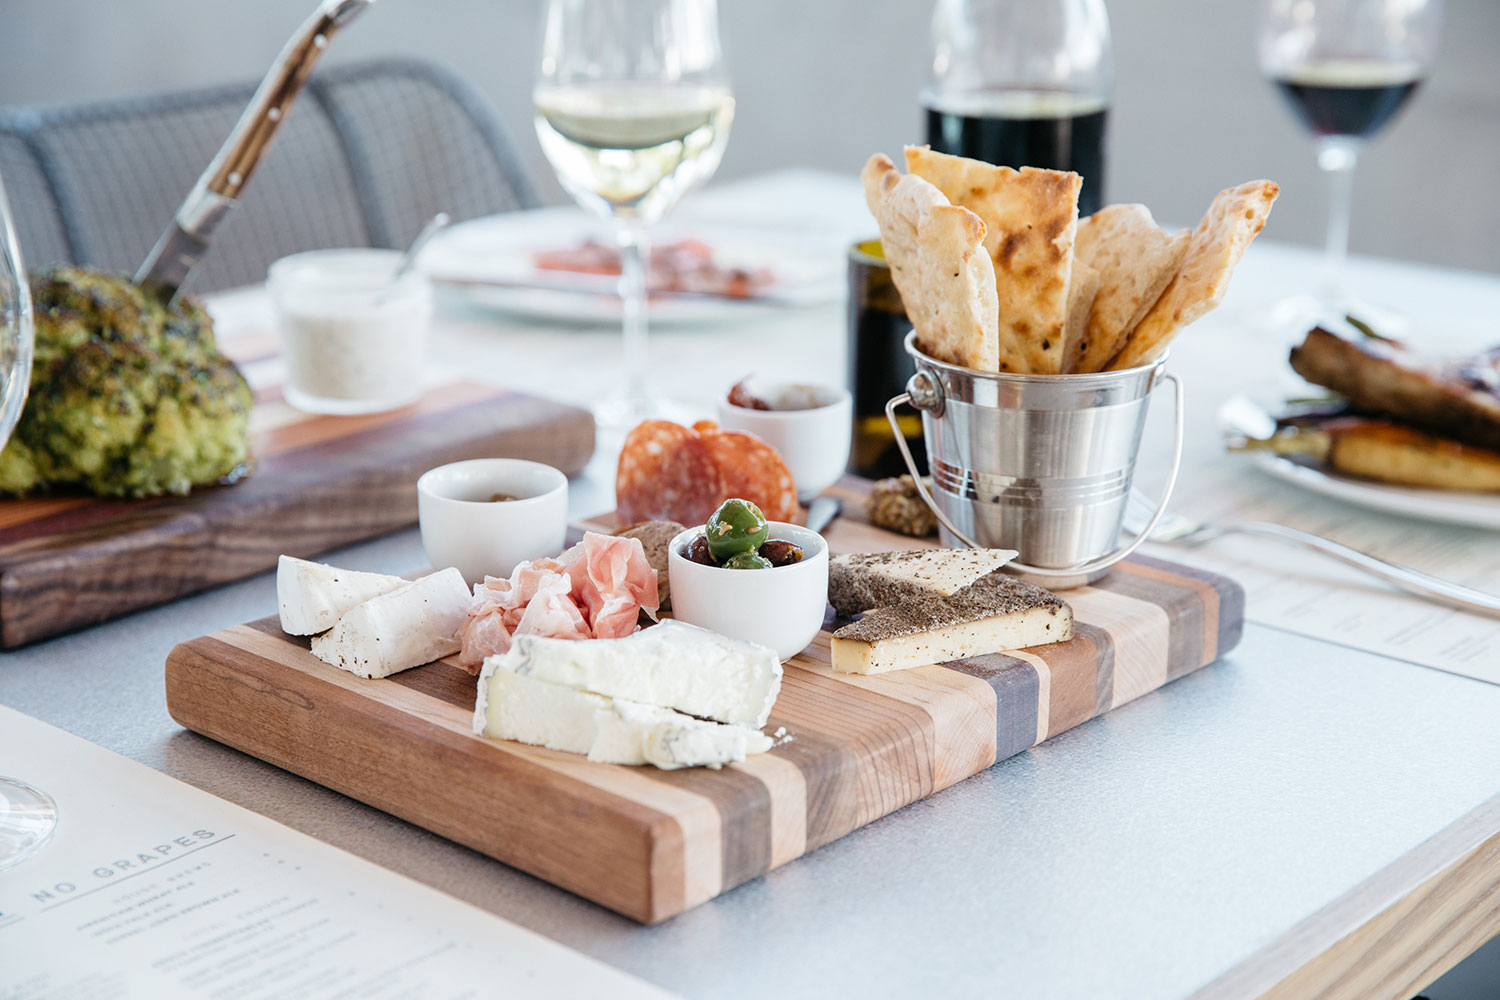 Cheese board // photo courtesy of Sixty Vines